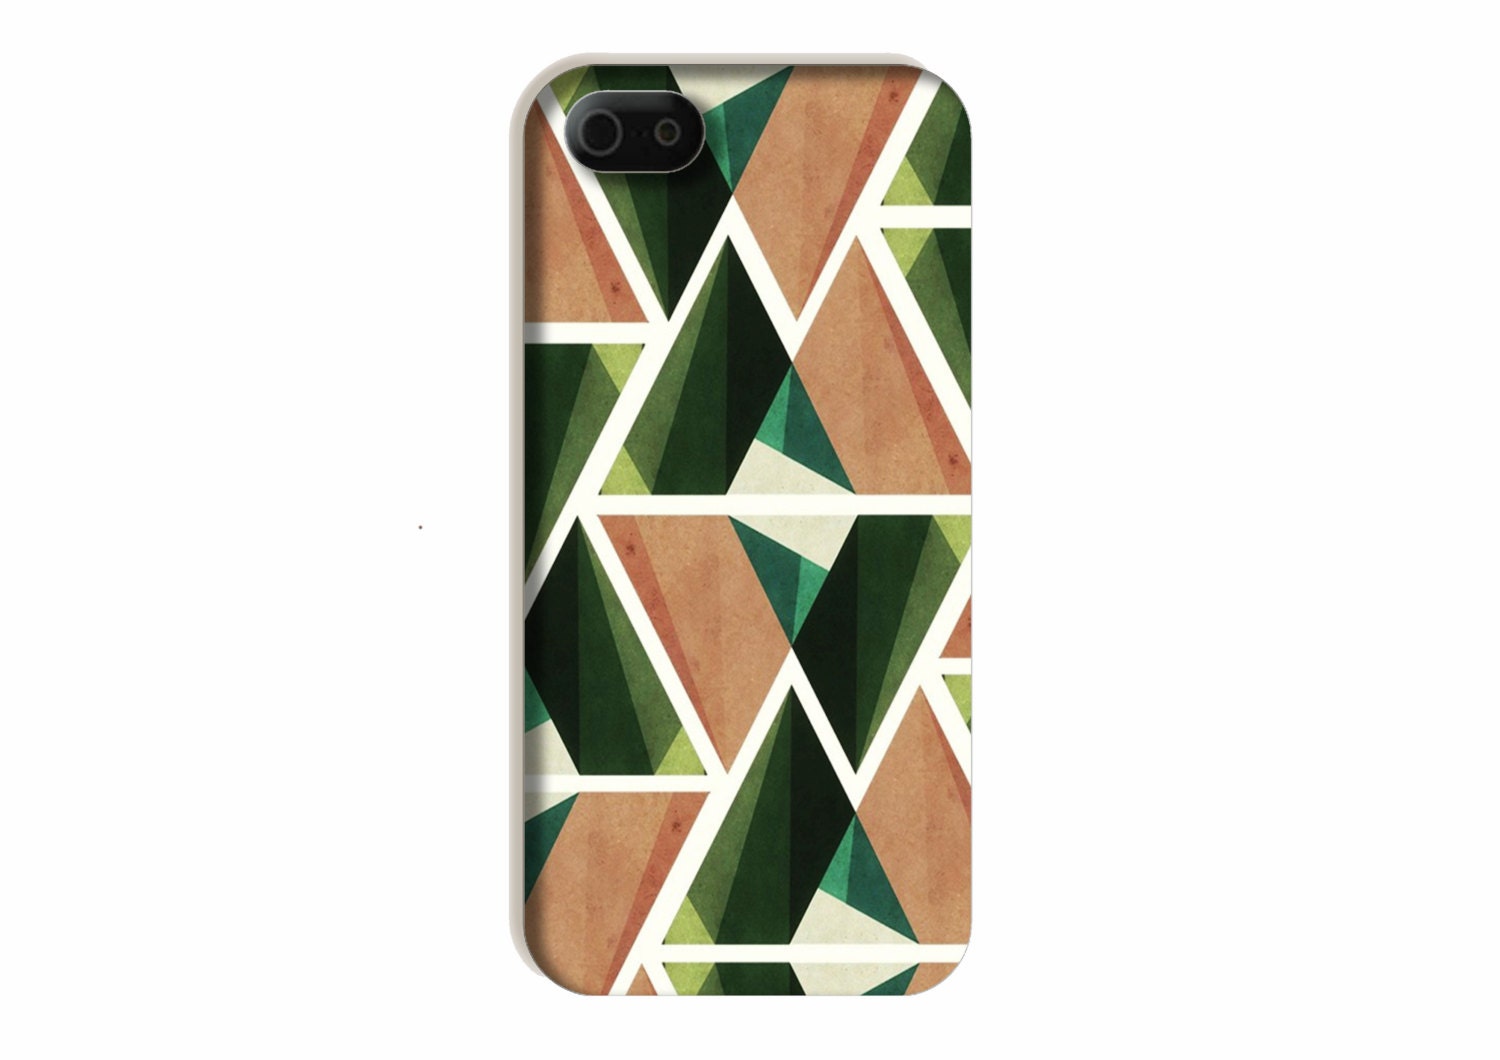 Facets in Green and Tan Plastic Snap On Mobile Phone Case, Fits iPhone 4, 4S, 5, 5S - Krizzana